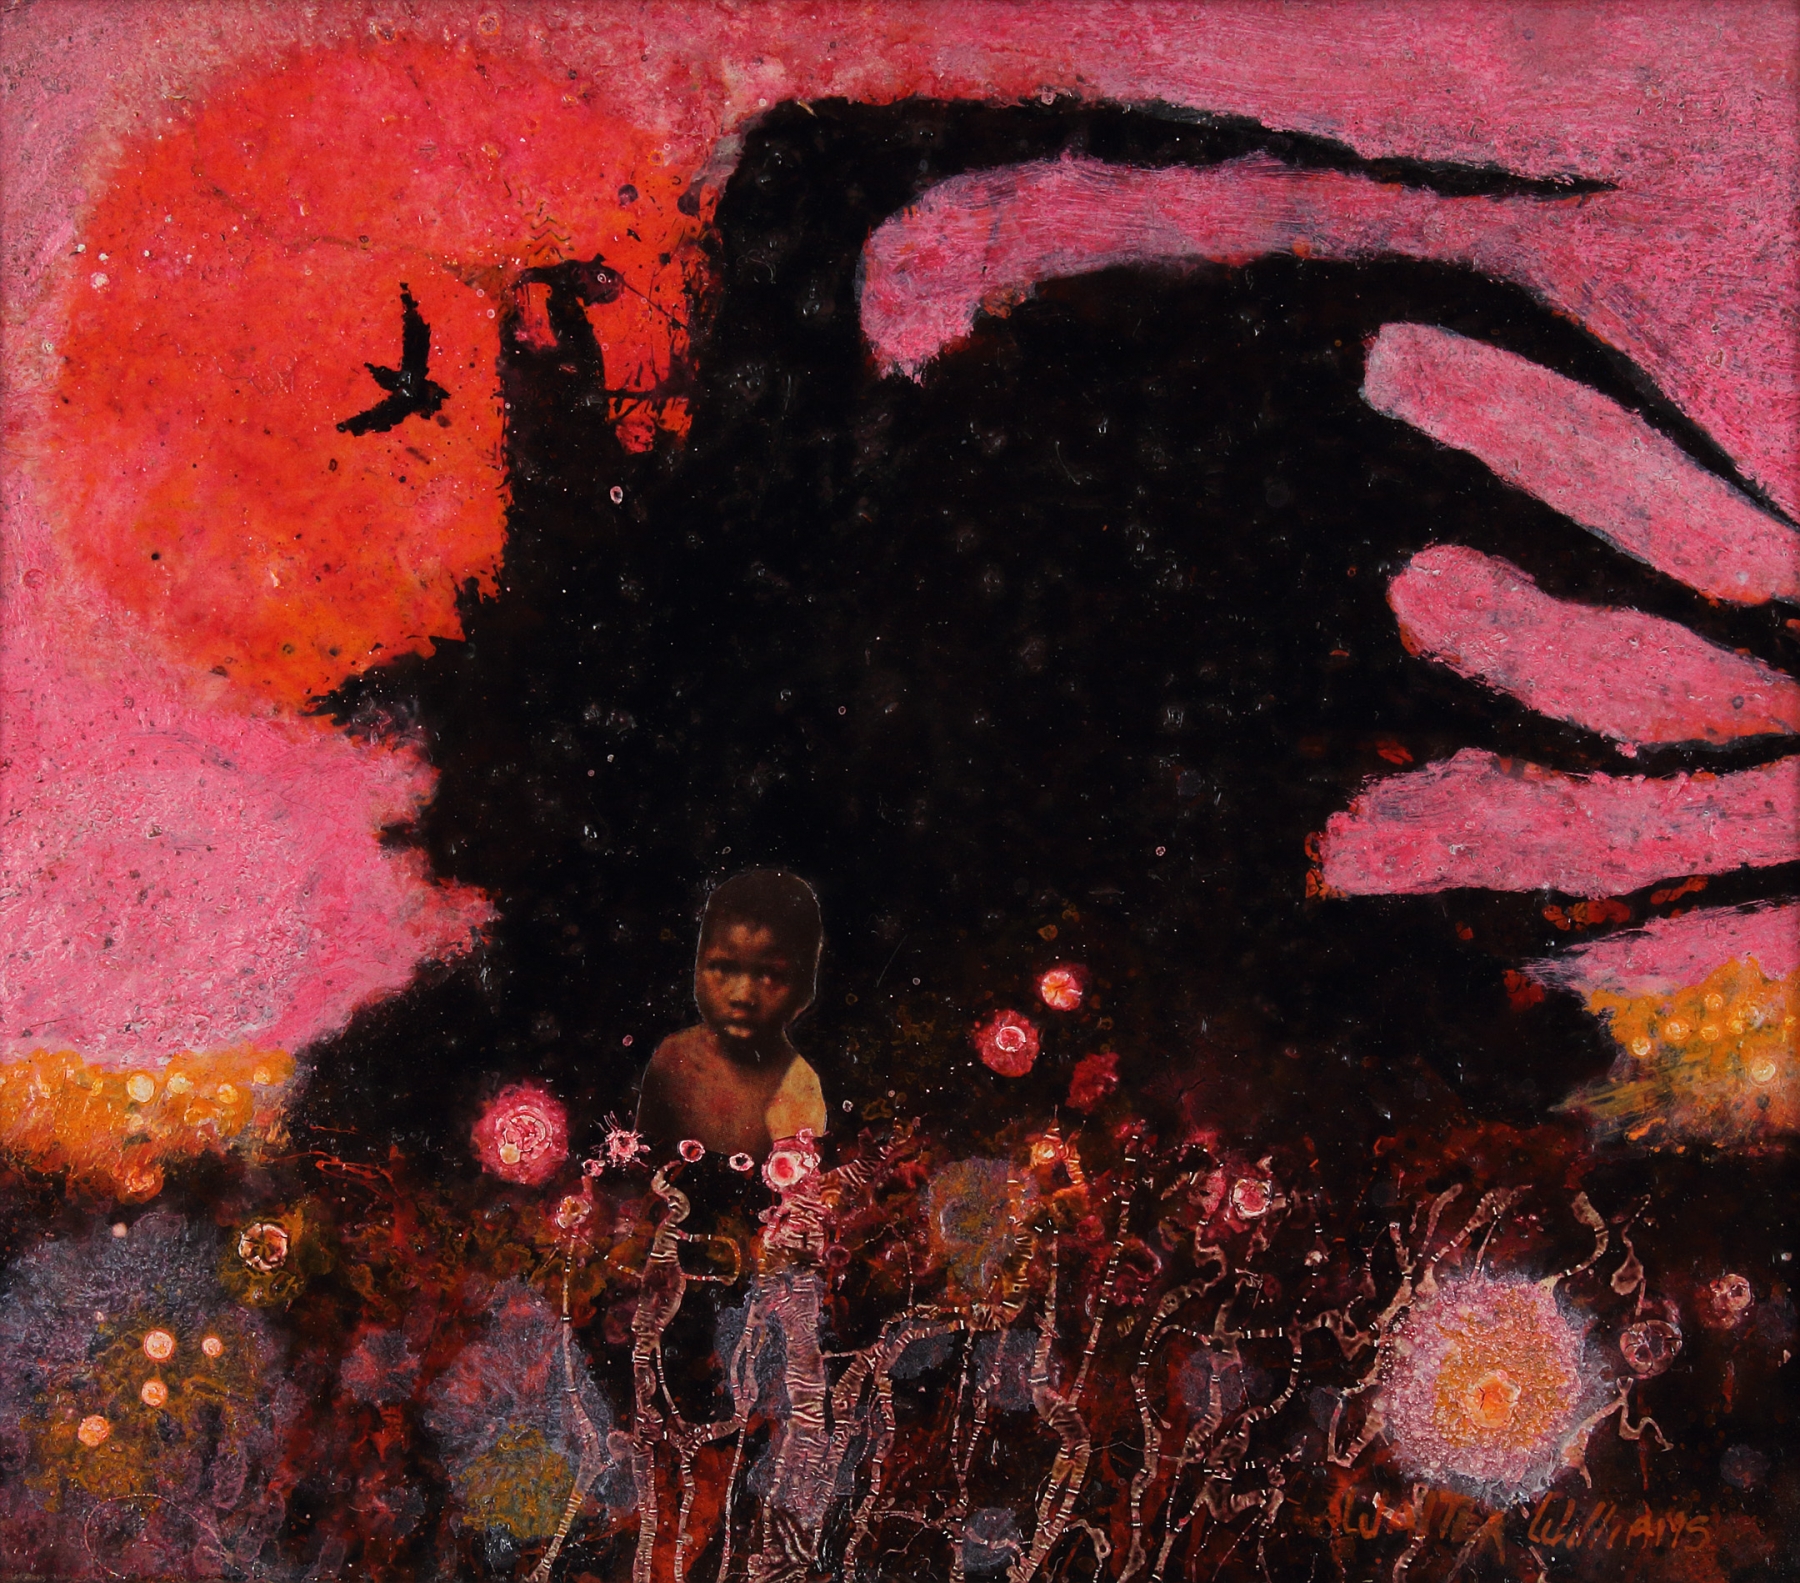 Boy with Roots, 1970, mixed media on board, 7 x 8 &frac12; inches